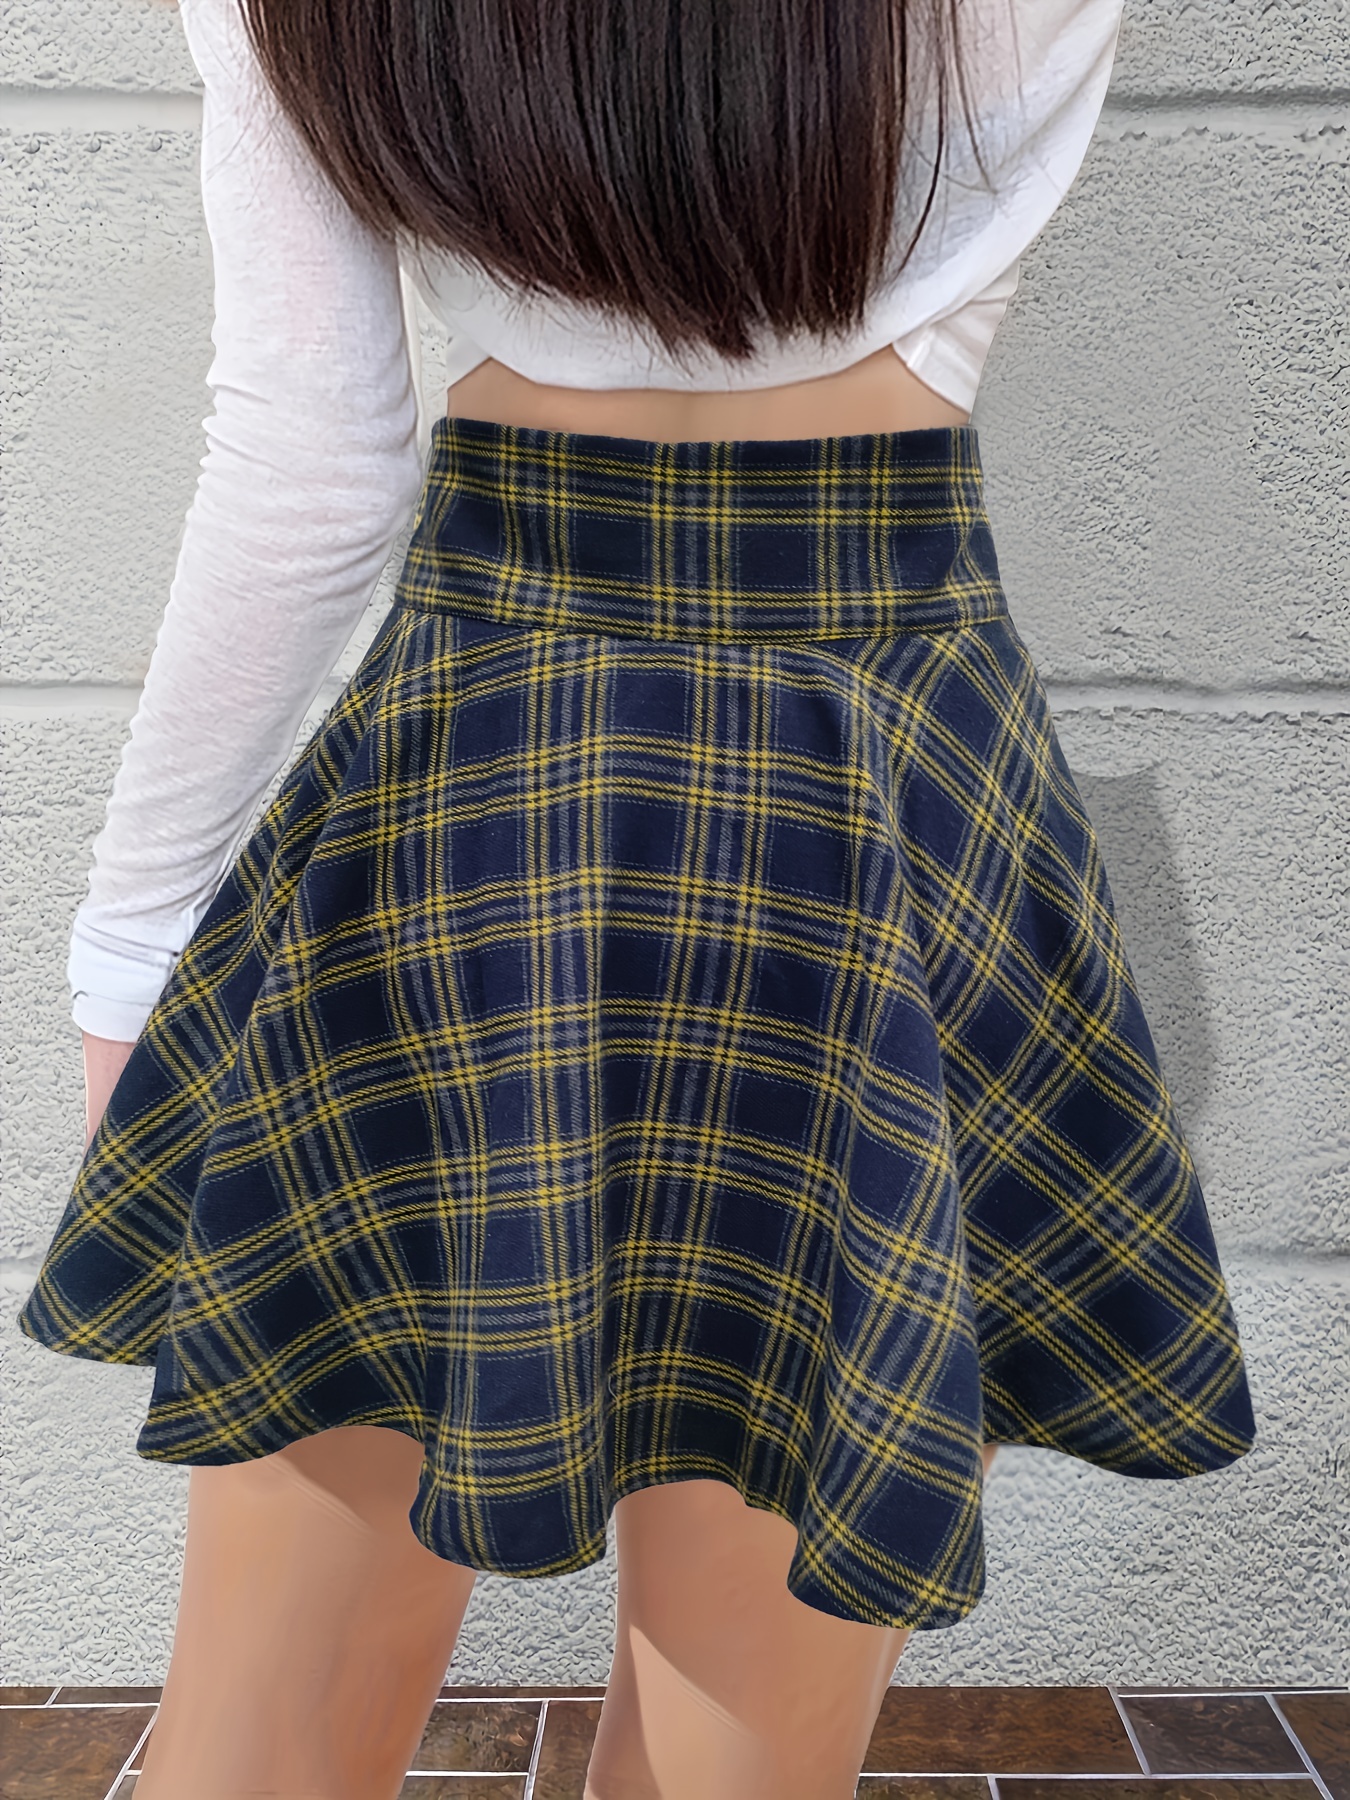 Your Best Guide On How To Style A Brown Skirt